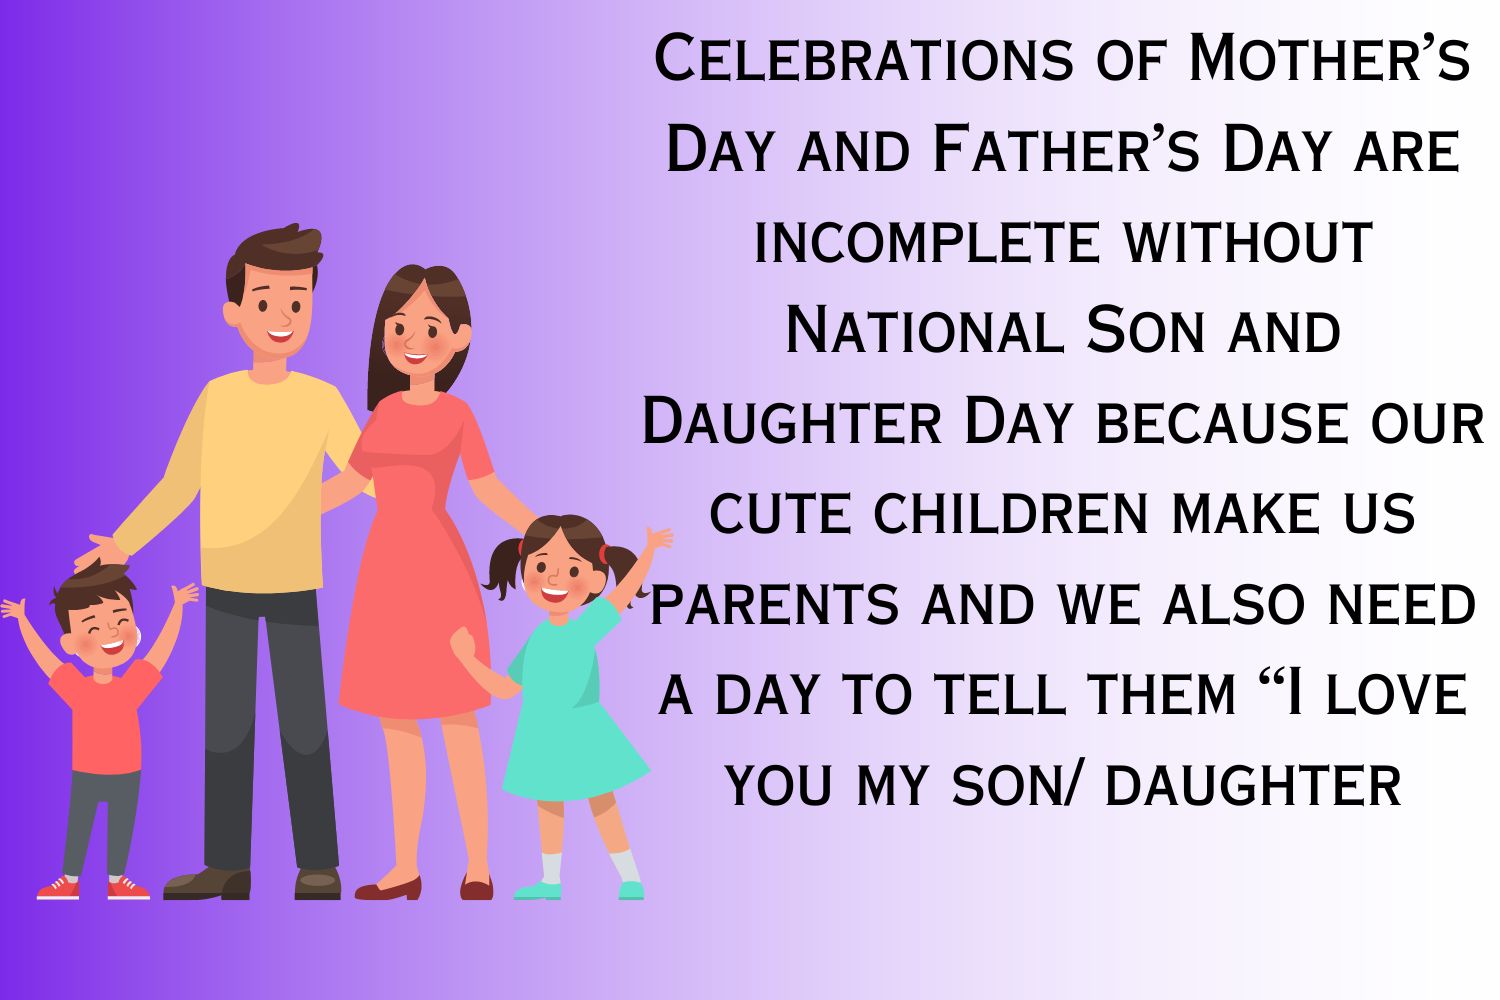 National Son and Daughter Day Image